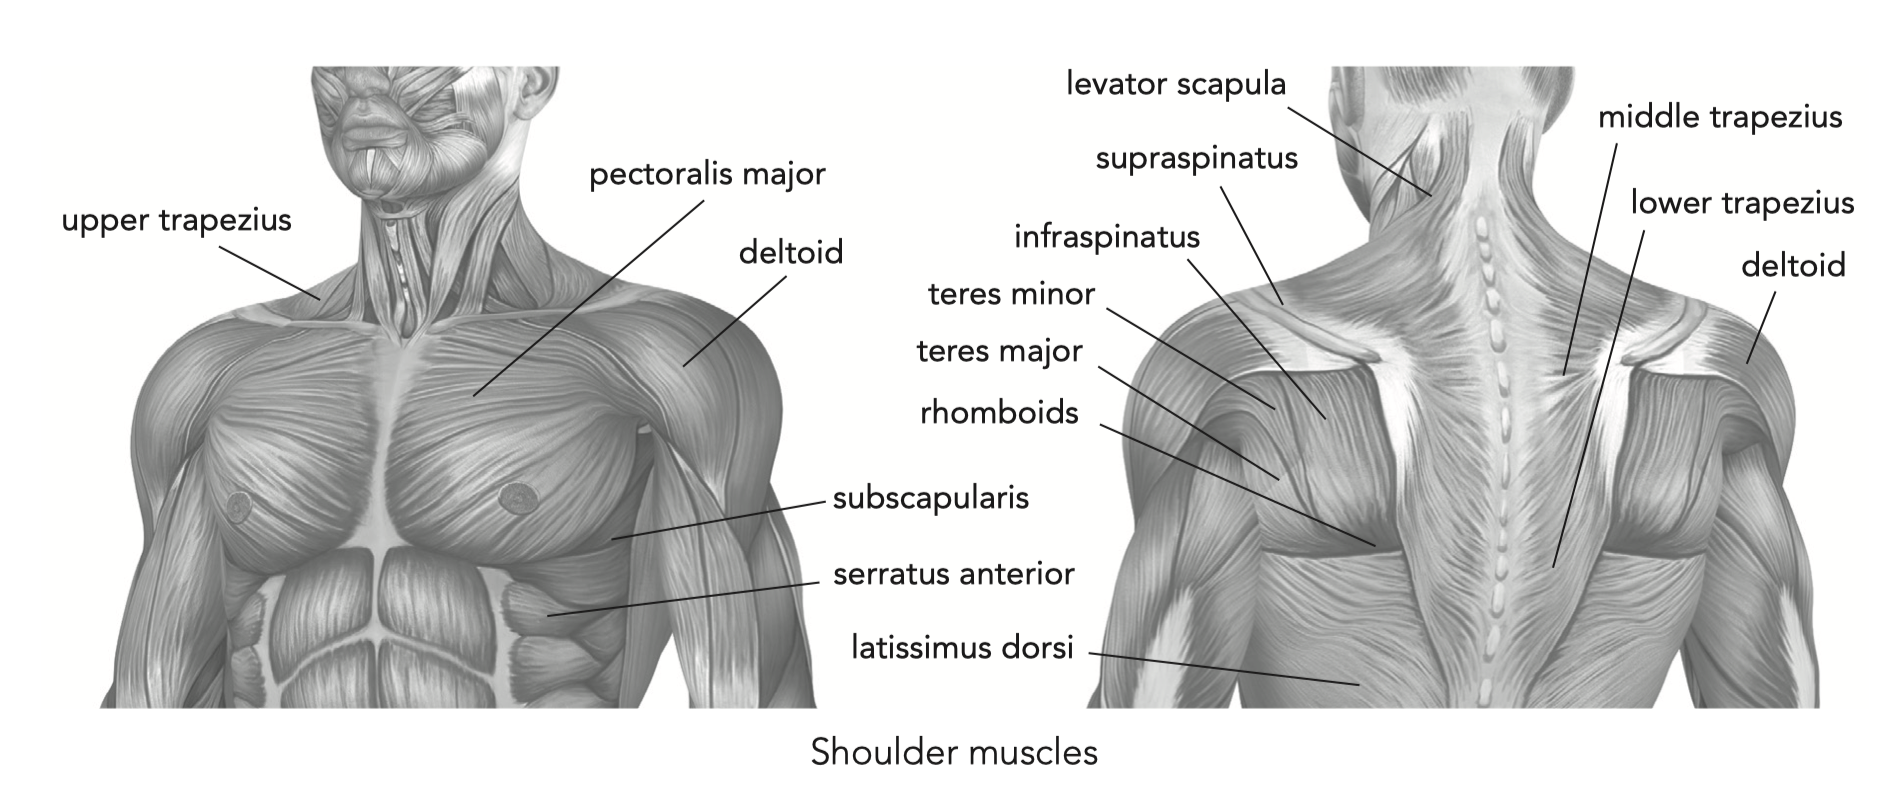 Names Of Muscles In Shoulder / Free Image Gallery / I started this